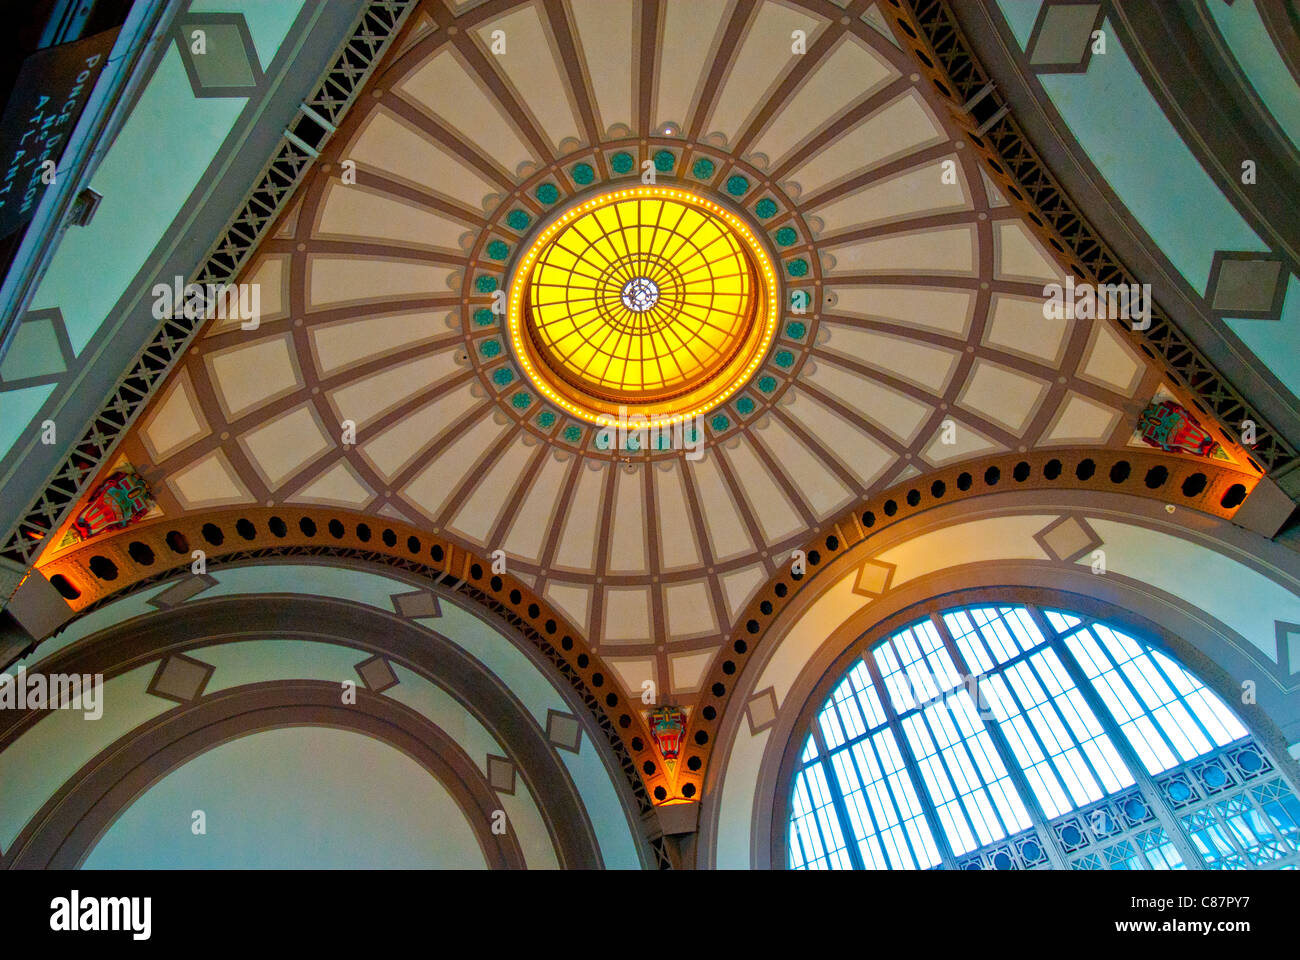 Domed ceiling in Chattanooga Choo Choo Historic Hotel, built in 1908 as Terminal Station, Chattanooga, Tennessee, USA Stock Photo